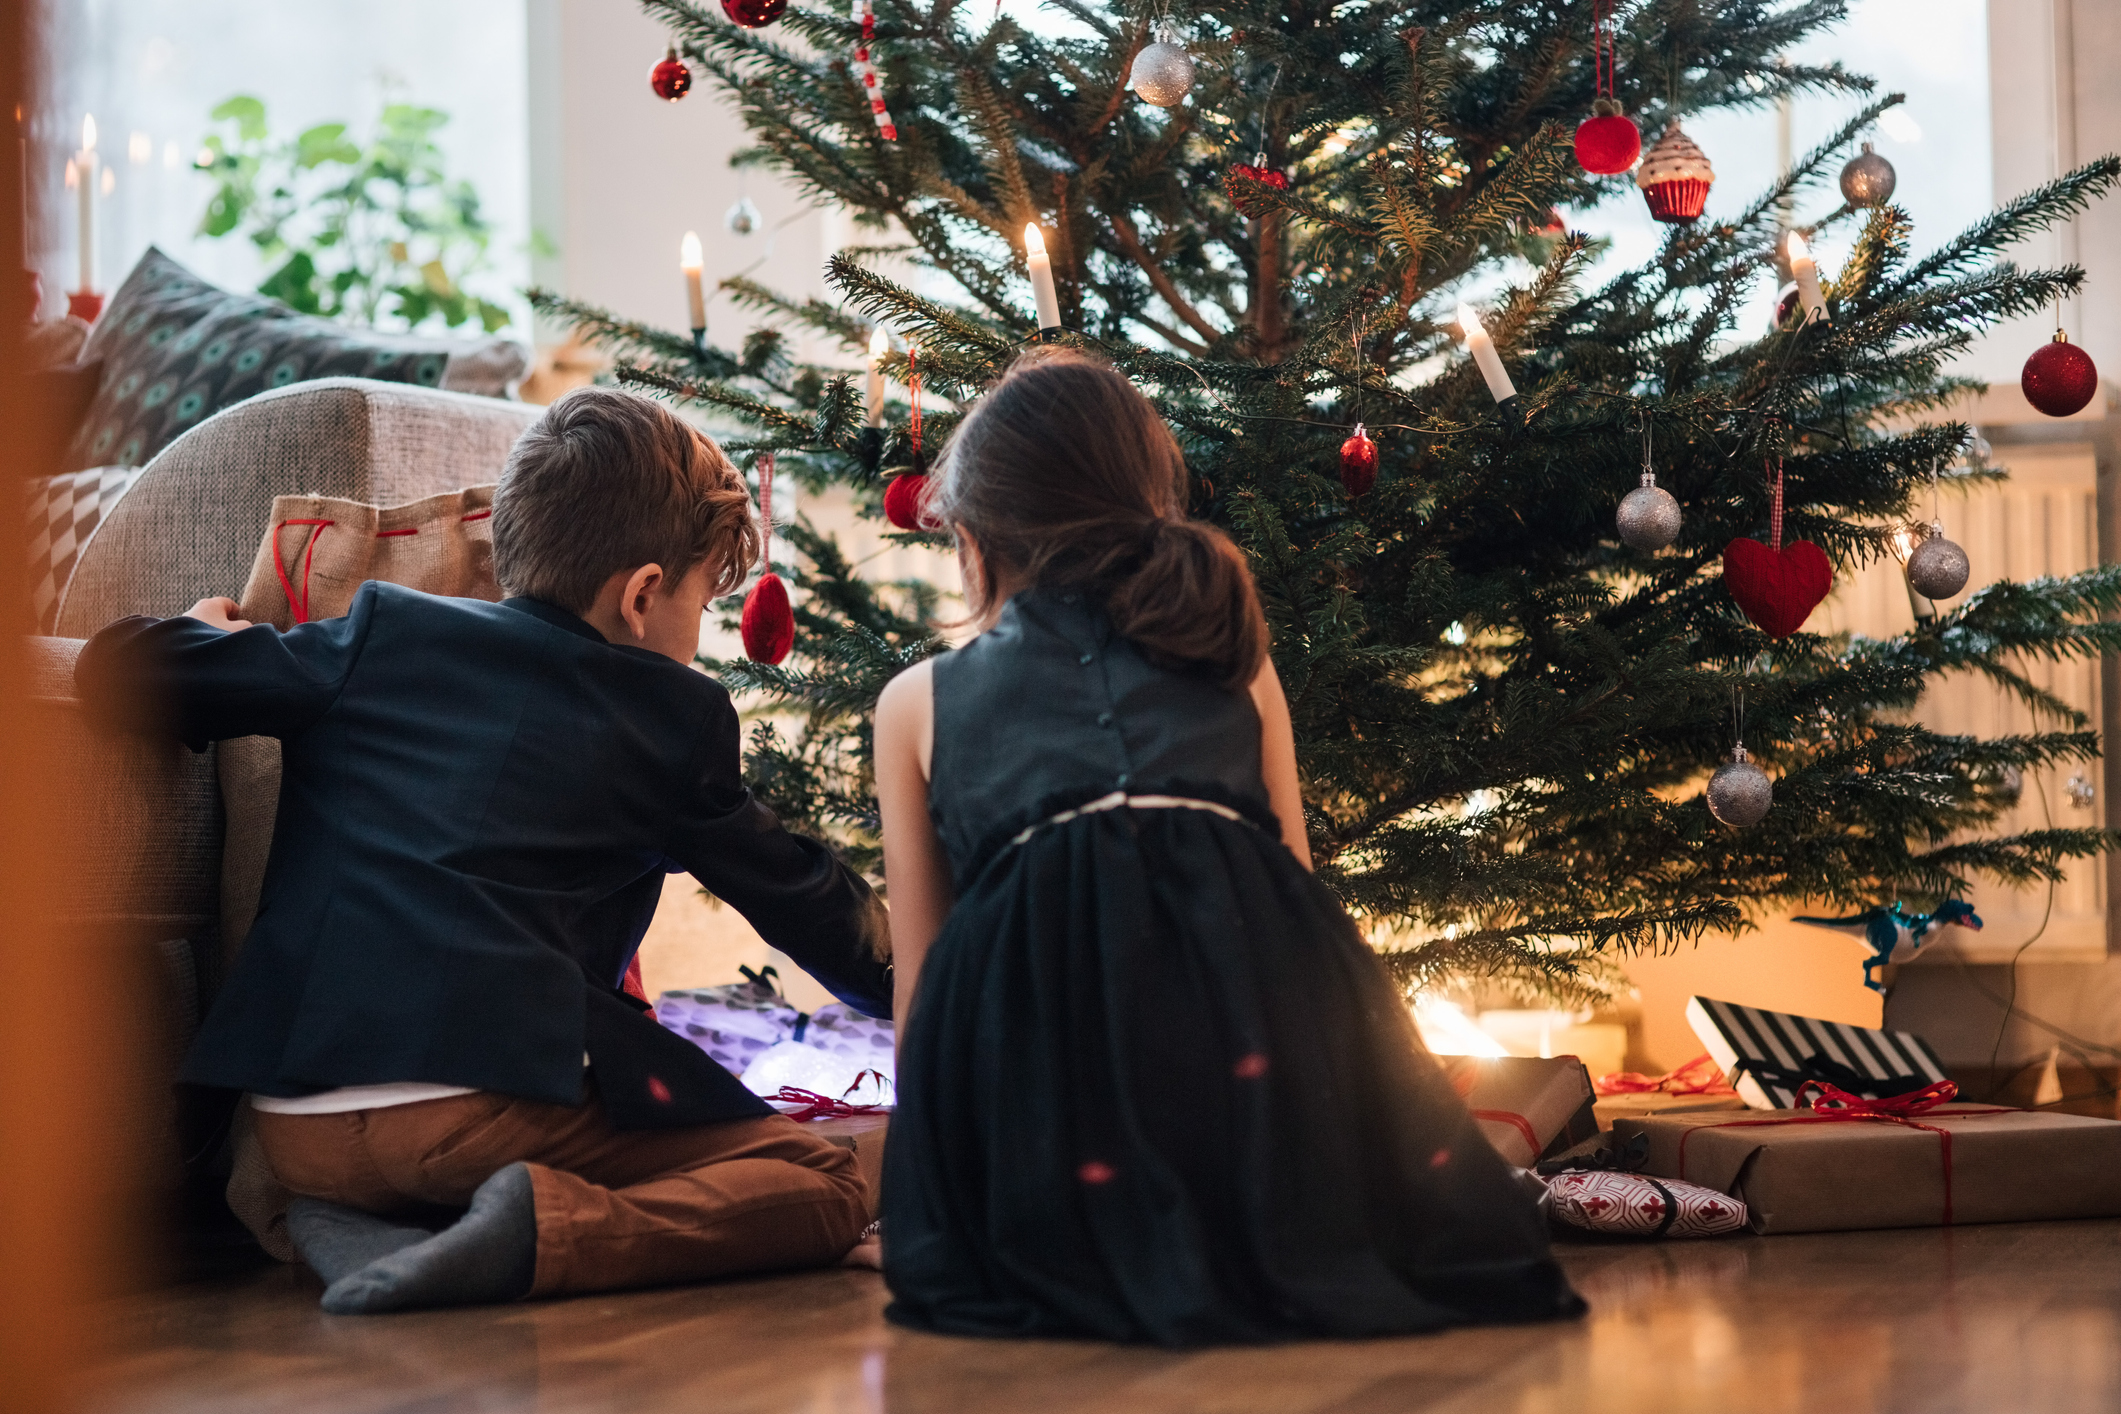 How to Prevent Child Sexual Abuse During the Holidays - Ms. Magazine